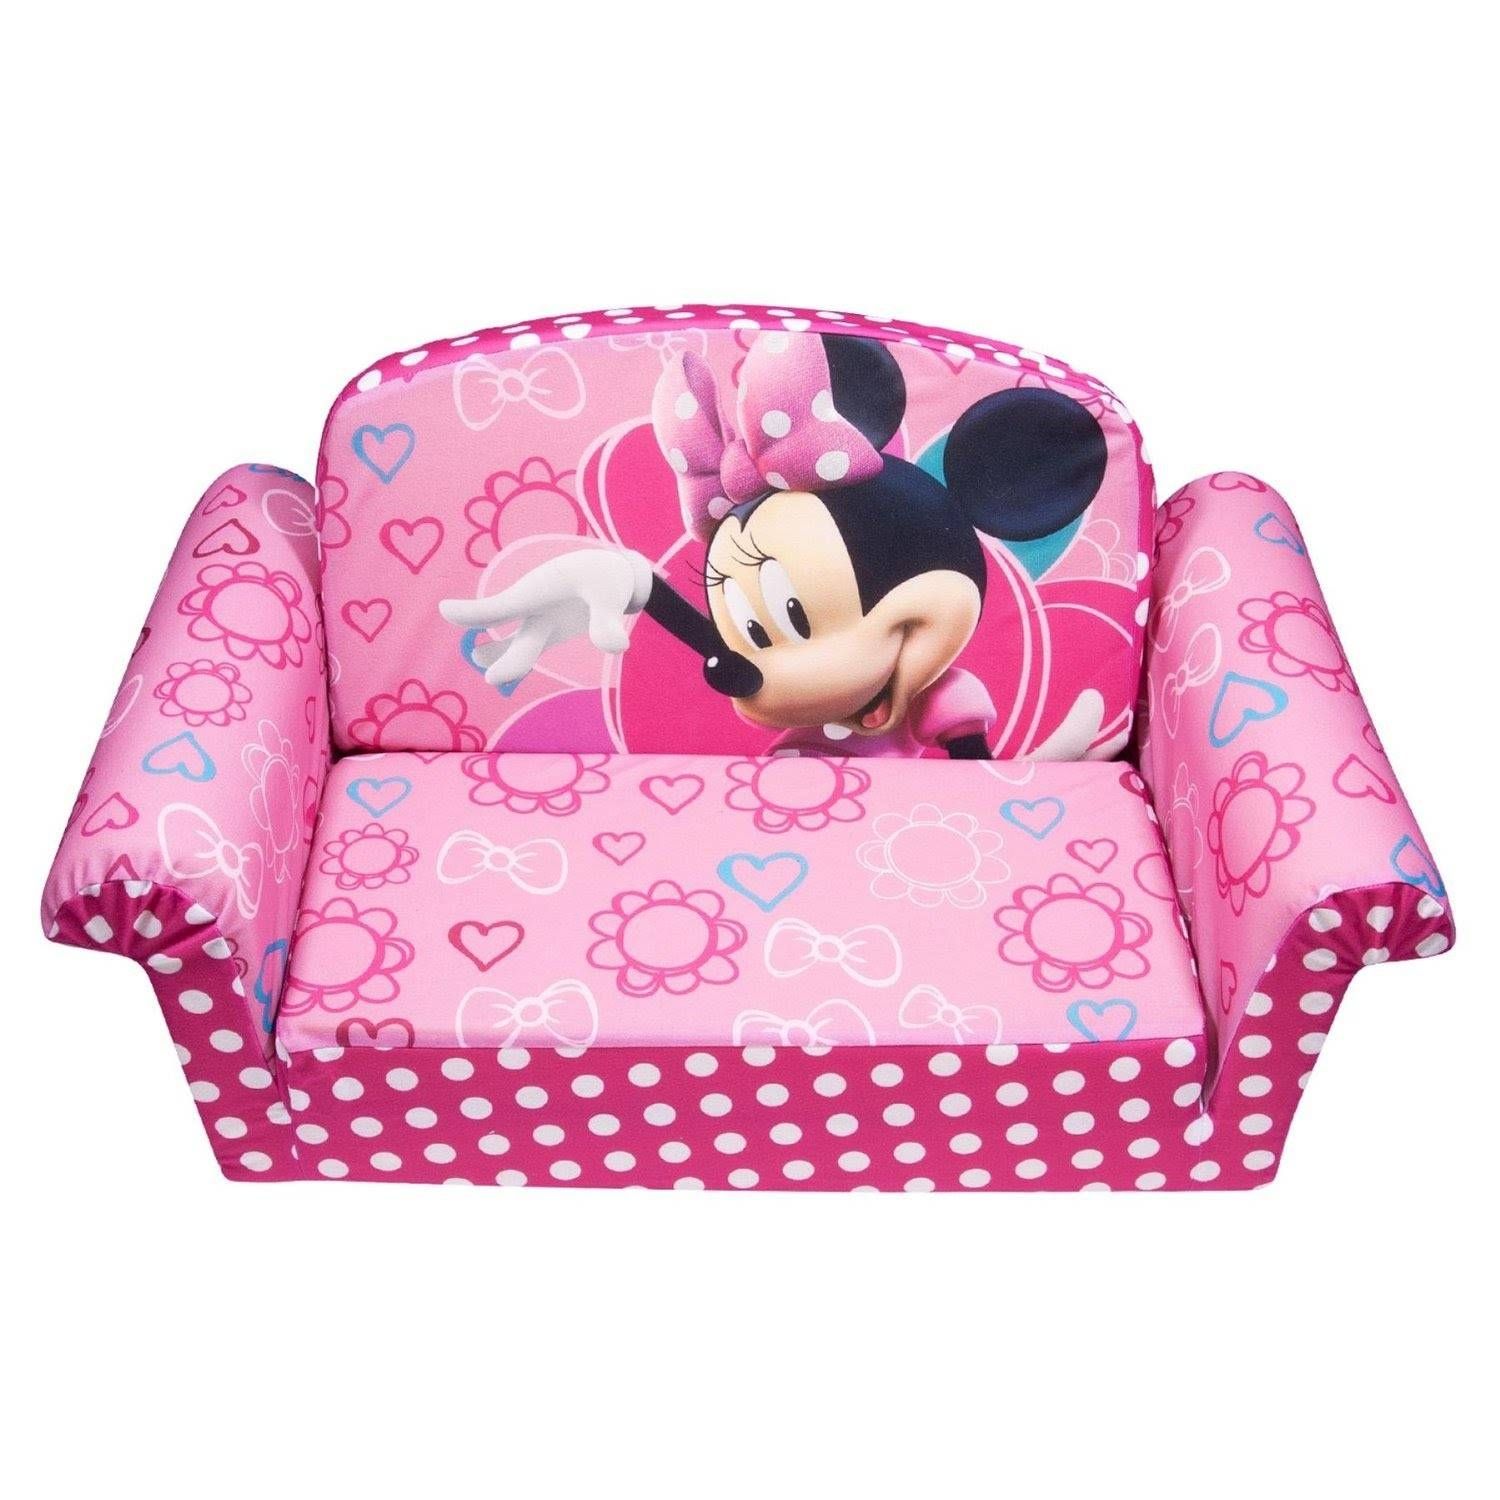 Review: Marshmallow Children's Furniture – 2 In 1 Flip Open Sofa Within Flip Out Sofa For Kids (View 15 of 30)